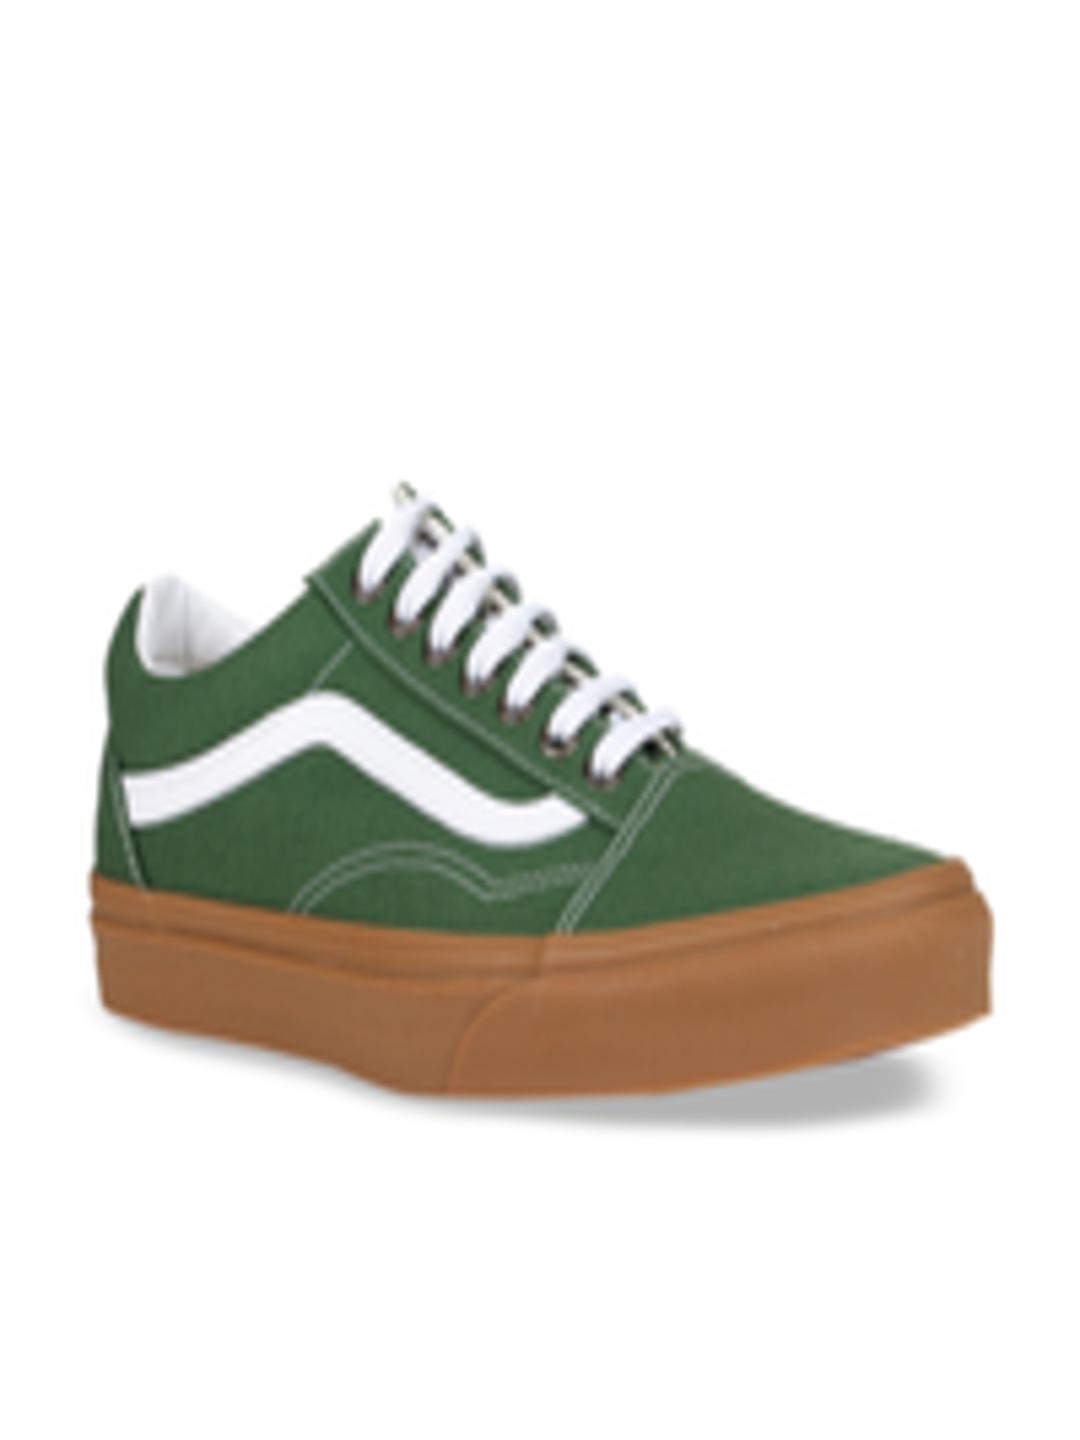 Buy Vans Unisex Green Solid Sneakers - Casual Shoes for Unisex 12295762